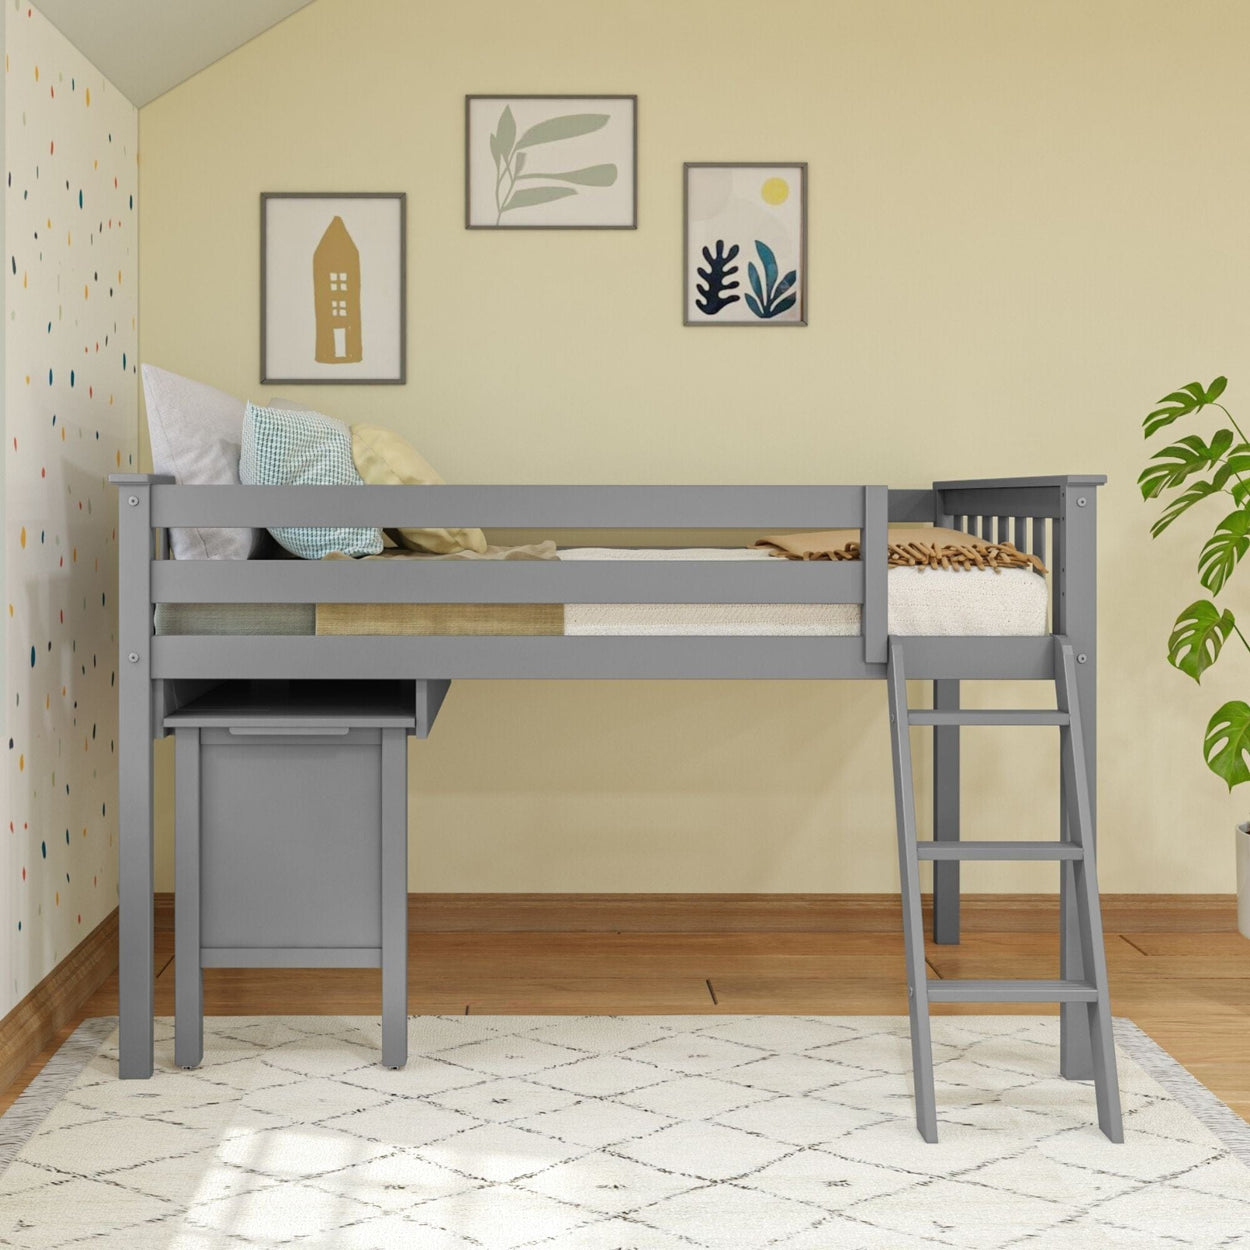 185212-121 : Loft Beds Twin-Size Low Loft with Pull-Out Desk, Grey